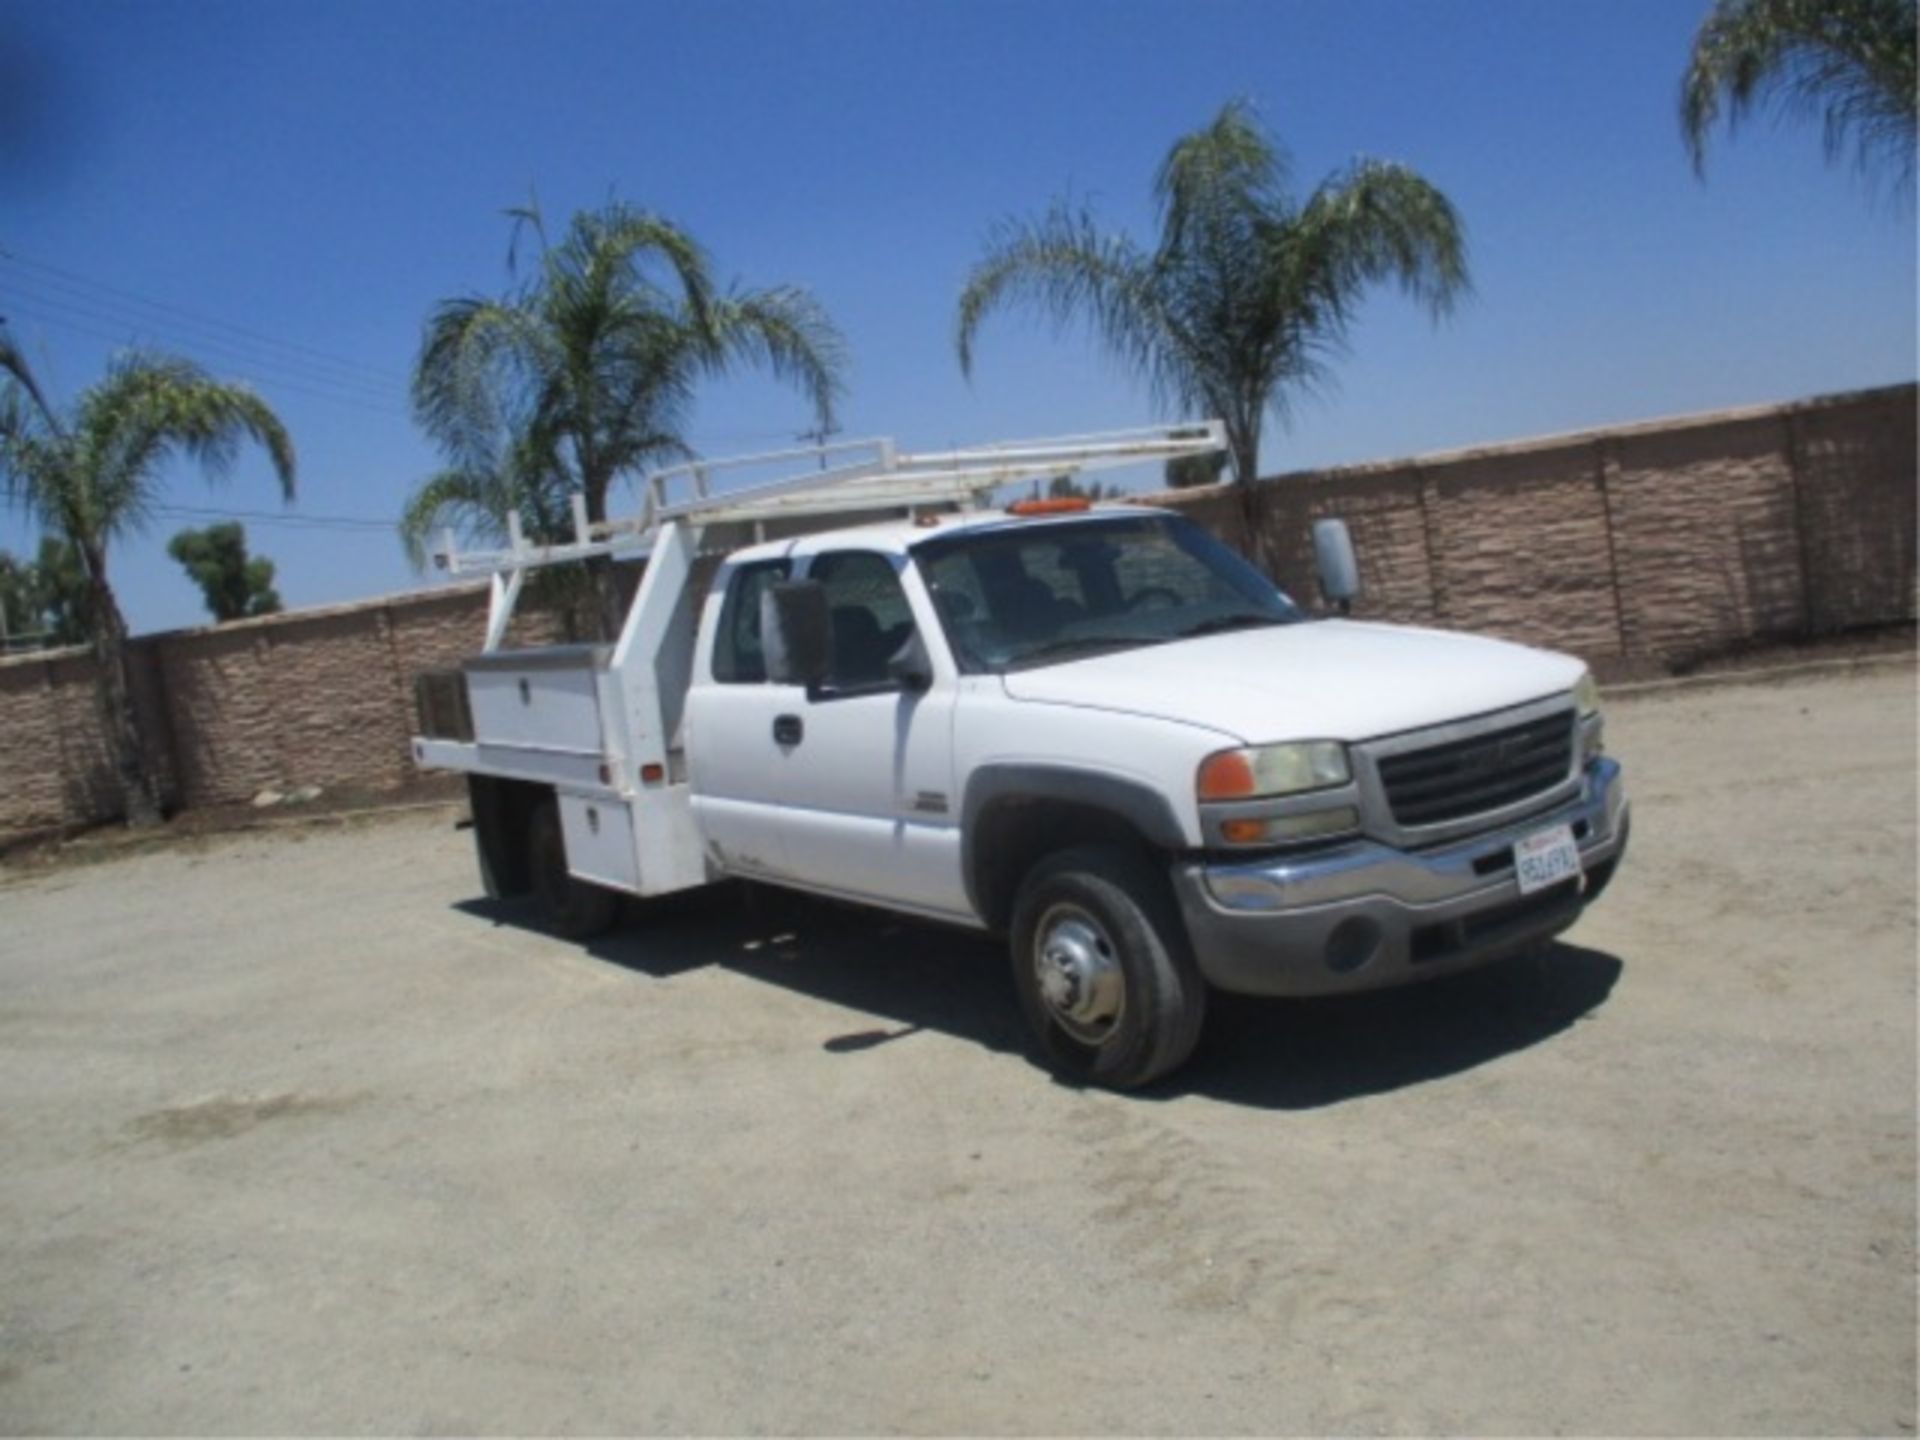 2006 Chevrolet 3500 Extended-Cab Utility Truck, 6.6L Turbo Diesel, Automatic, Tool Boxes, Lumber - Image 10 of 71